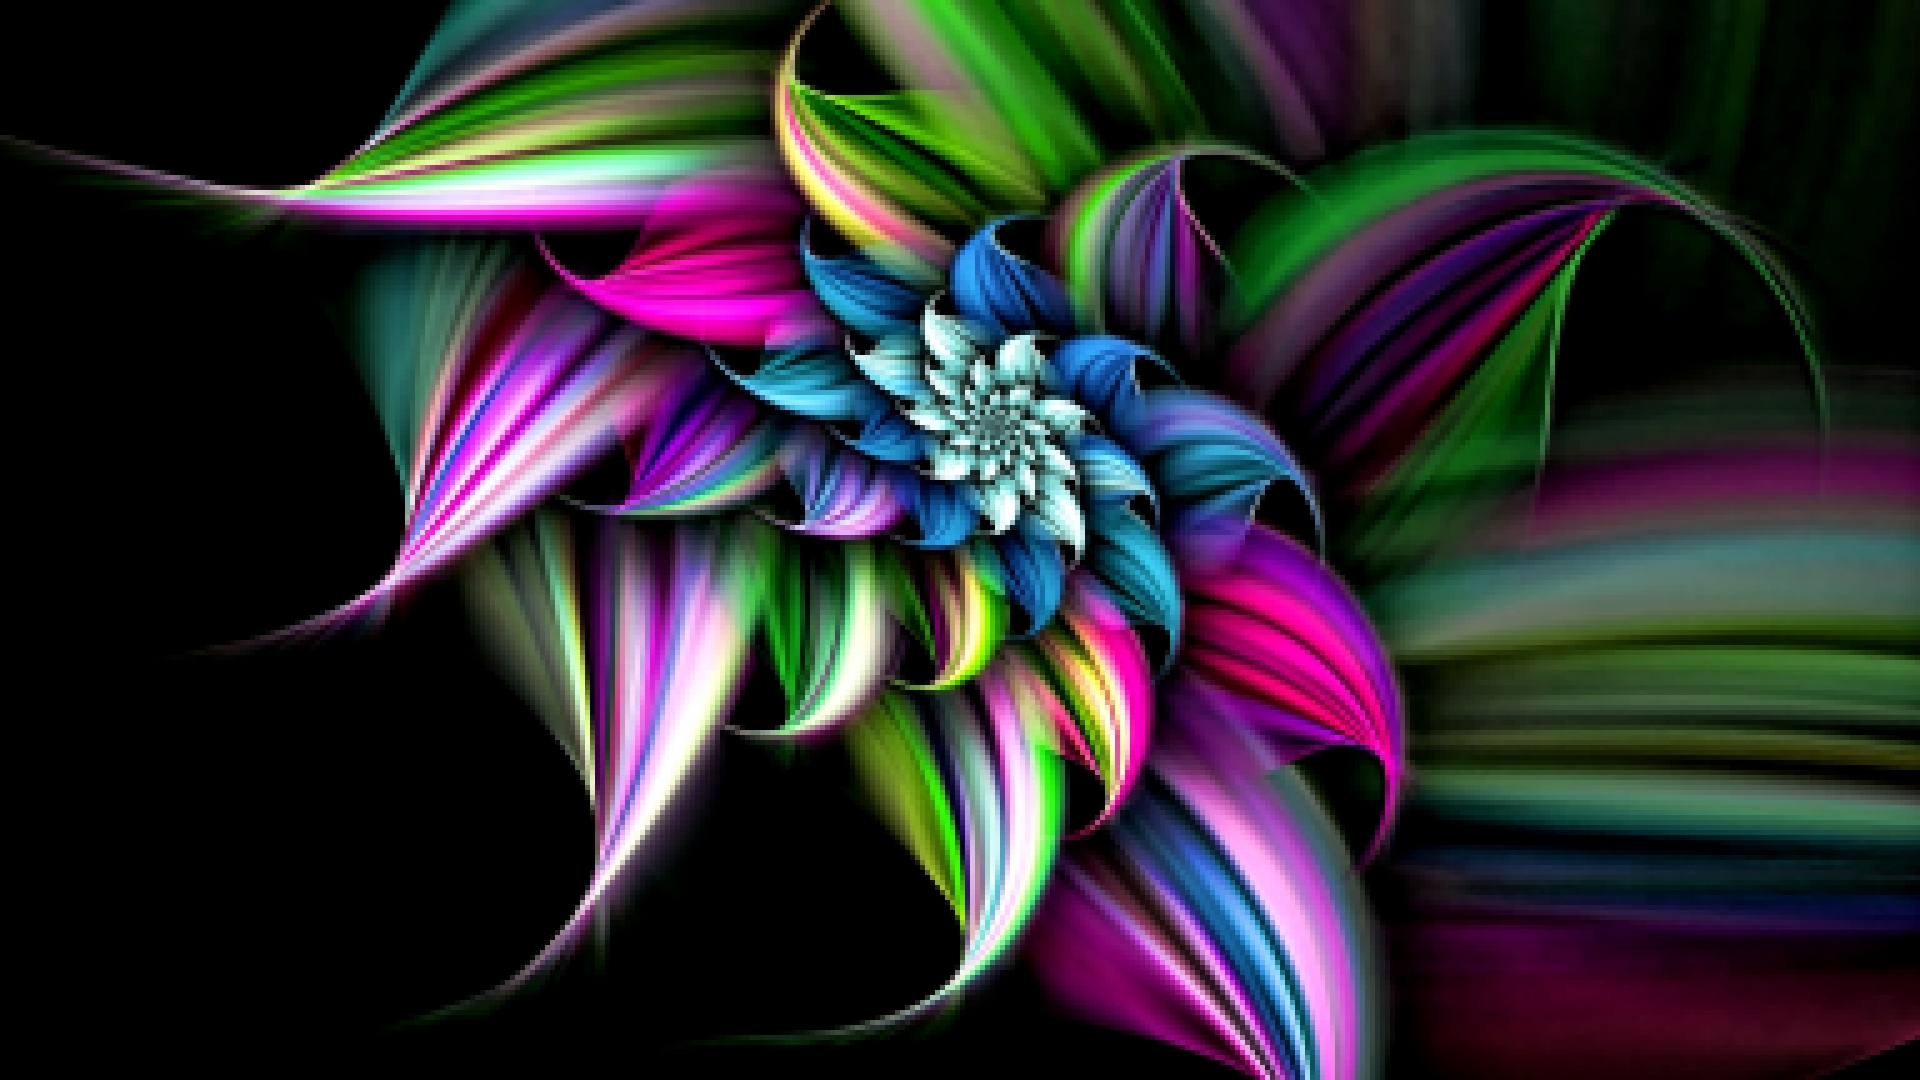 Wallpaper Hd 3d Flower Images & Pictures - Becuo.